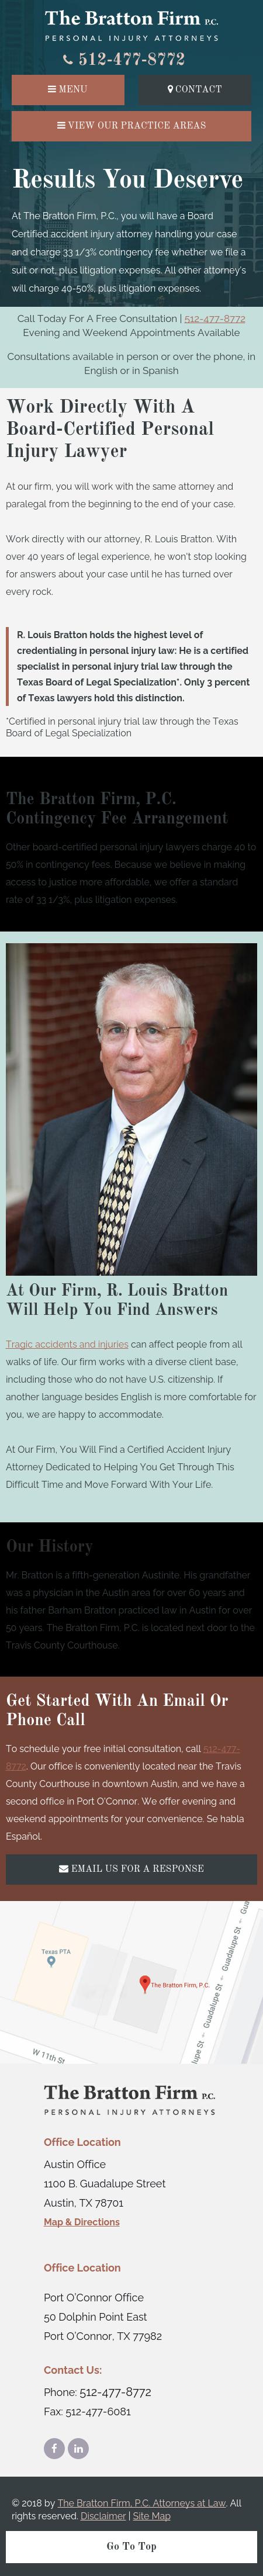 The Bratton Firm, P.C. Attorneys at Law - Austin TX Lawyers